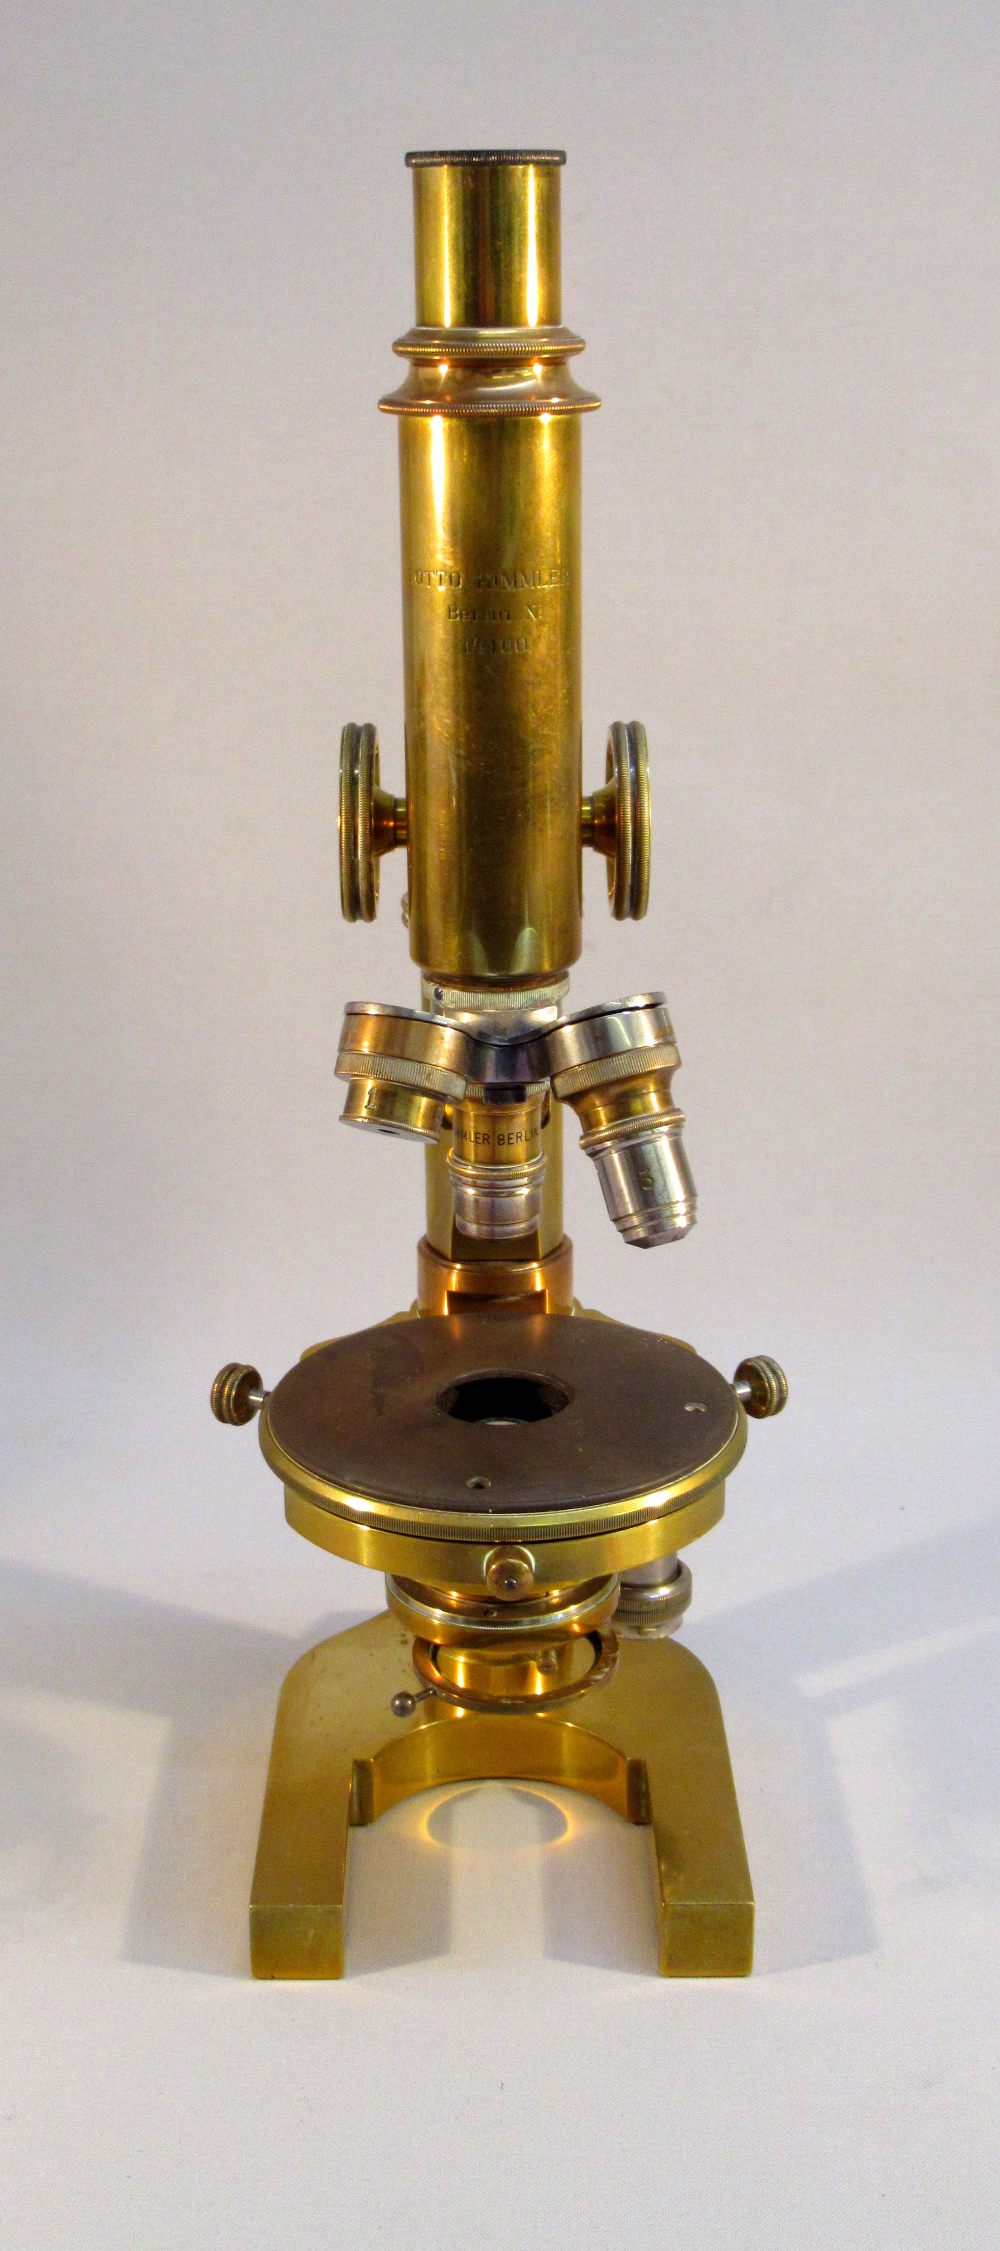 A LATE C19th BRASS MICROSCOPE BY OTTO HIMMLER. BERLIN N.14160 LACQUERED BRASS, HORSE SHOE FOOT, - Image 9 of 10